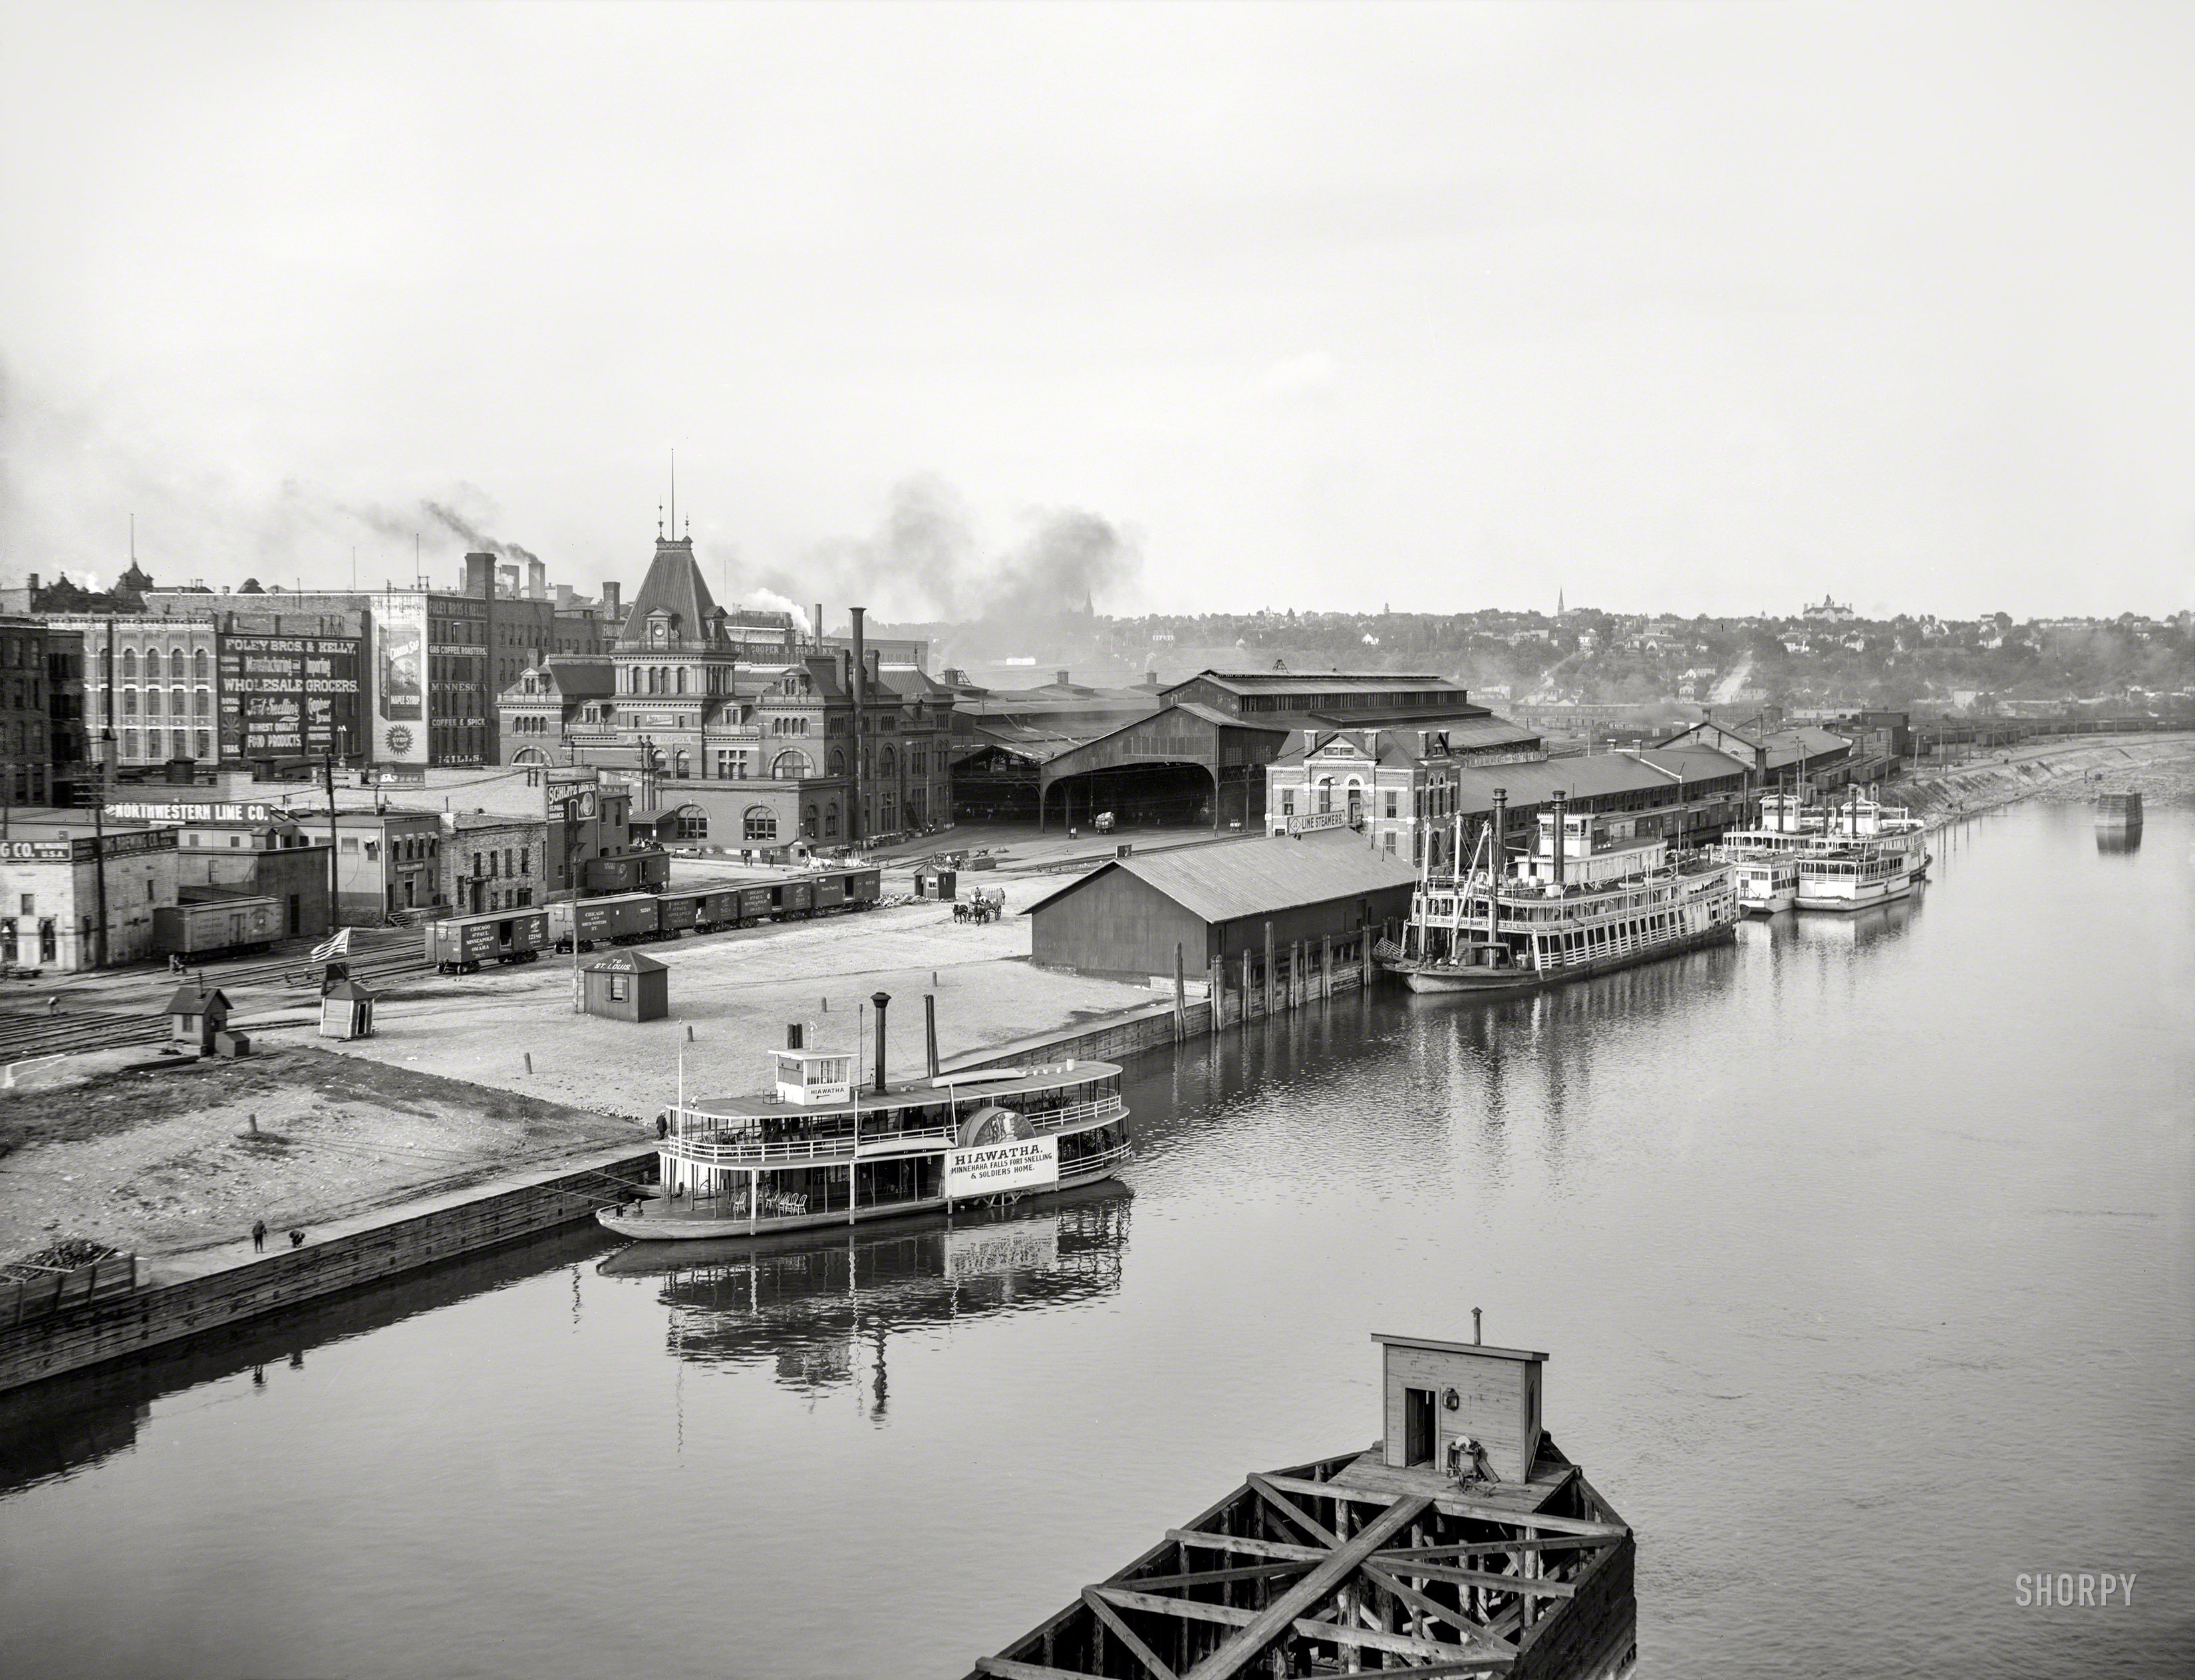 The Mississippi River circa 1905. "Union Depot and steamboat landing at foot of Jackson Street, St. Paul, Minnesota." Starring the sidewheeler Hiawatha. 8x10 inch dry plate glass negative, Detroit Photographic Company. View full size.